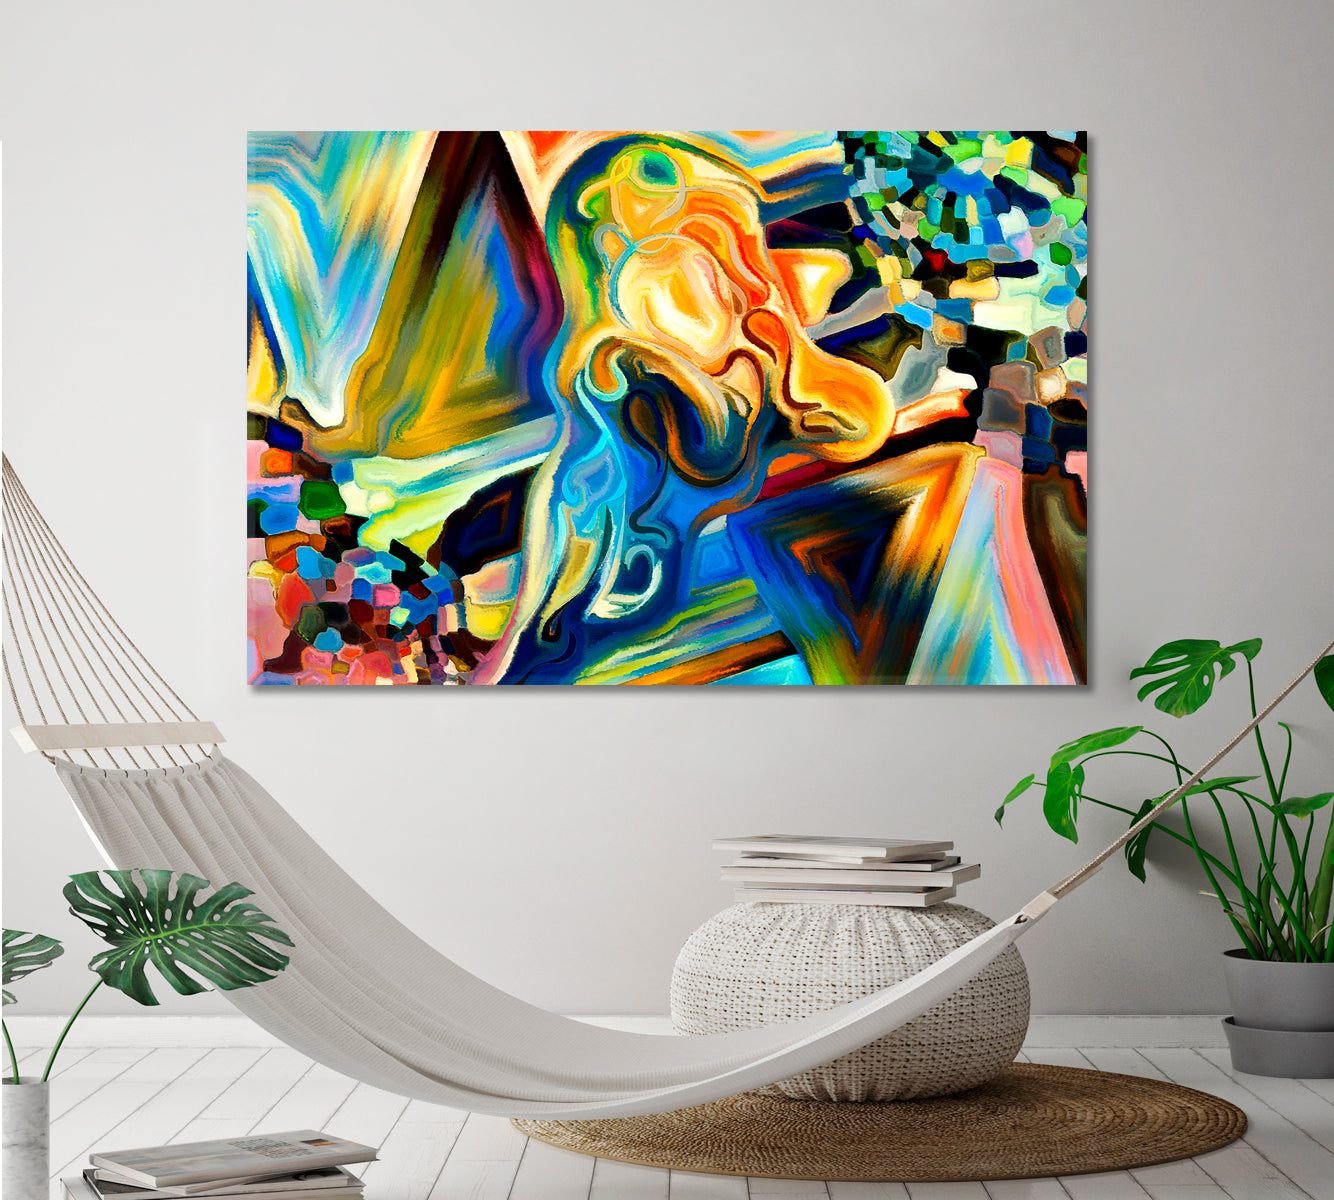 Human and Geometric Forms Collection Abstract Colorful Allegory Contemporary Art Artesty 1 panel 24" x 16" 